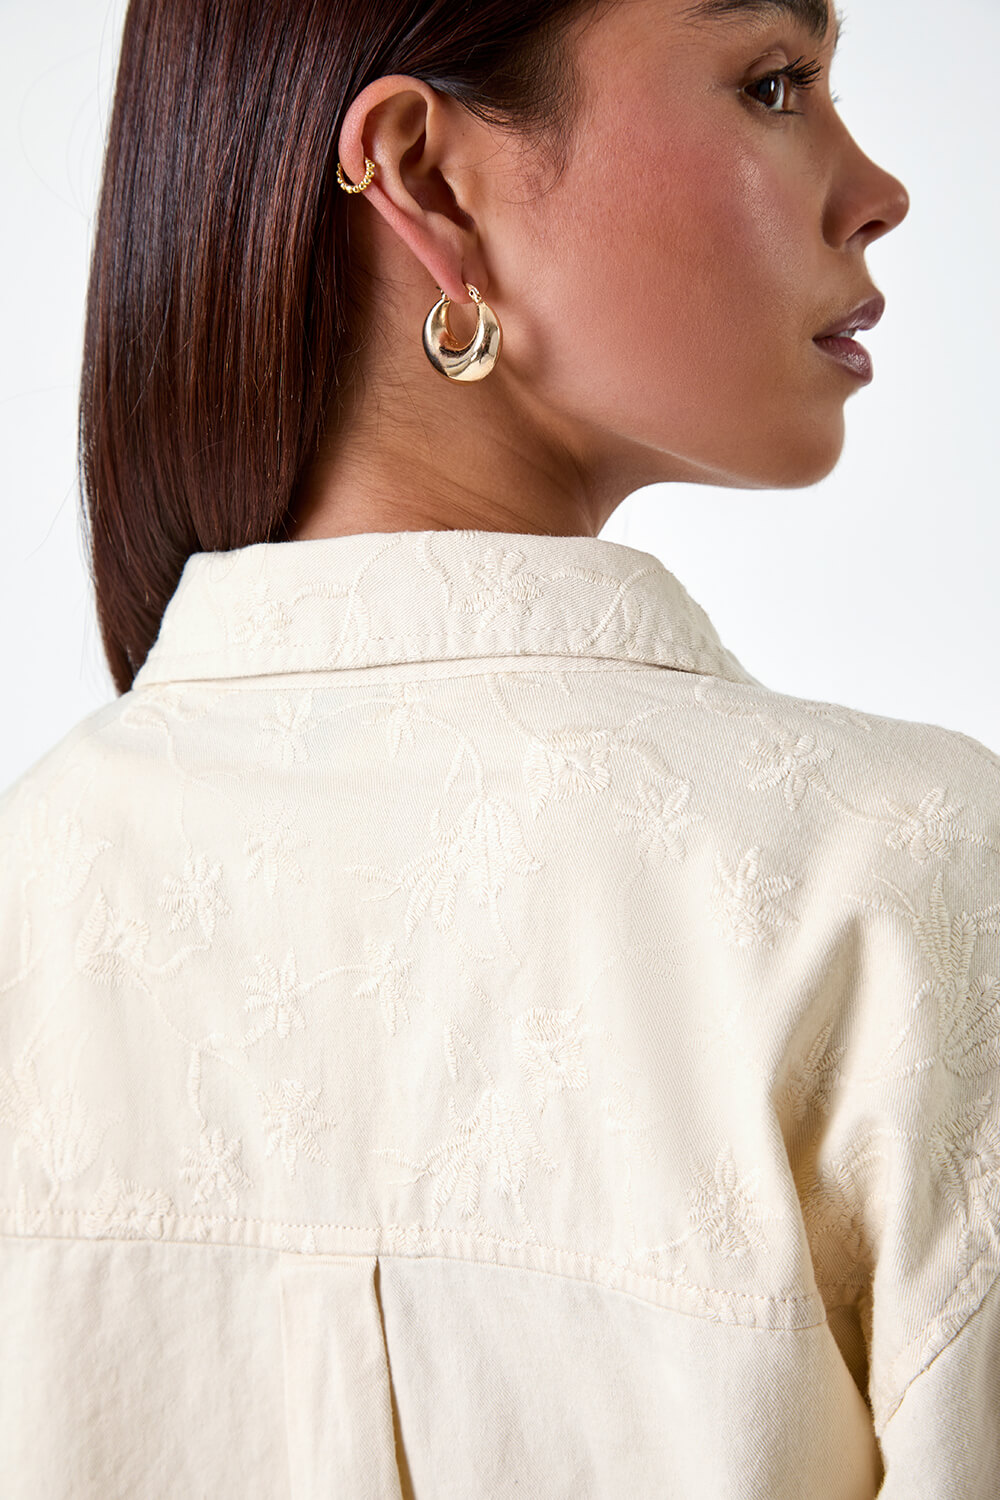 Stone Petite Cotton Broderie Pocket Jacket, Image 5 of 5